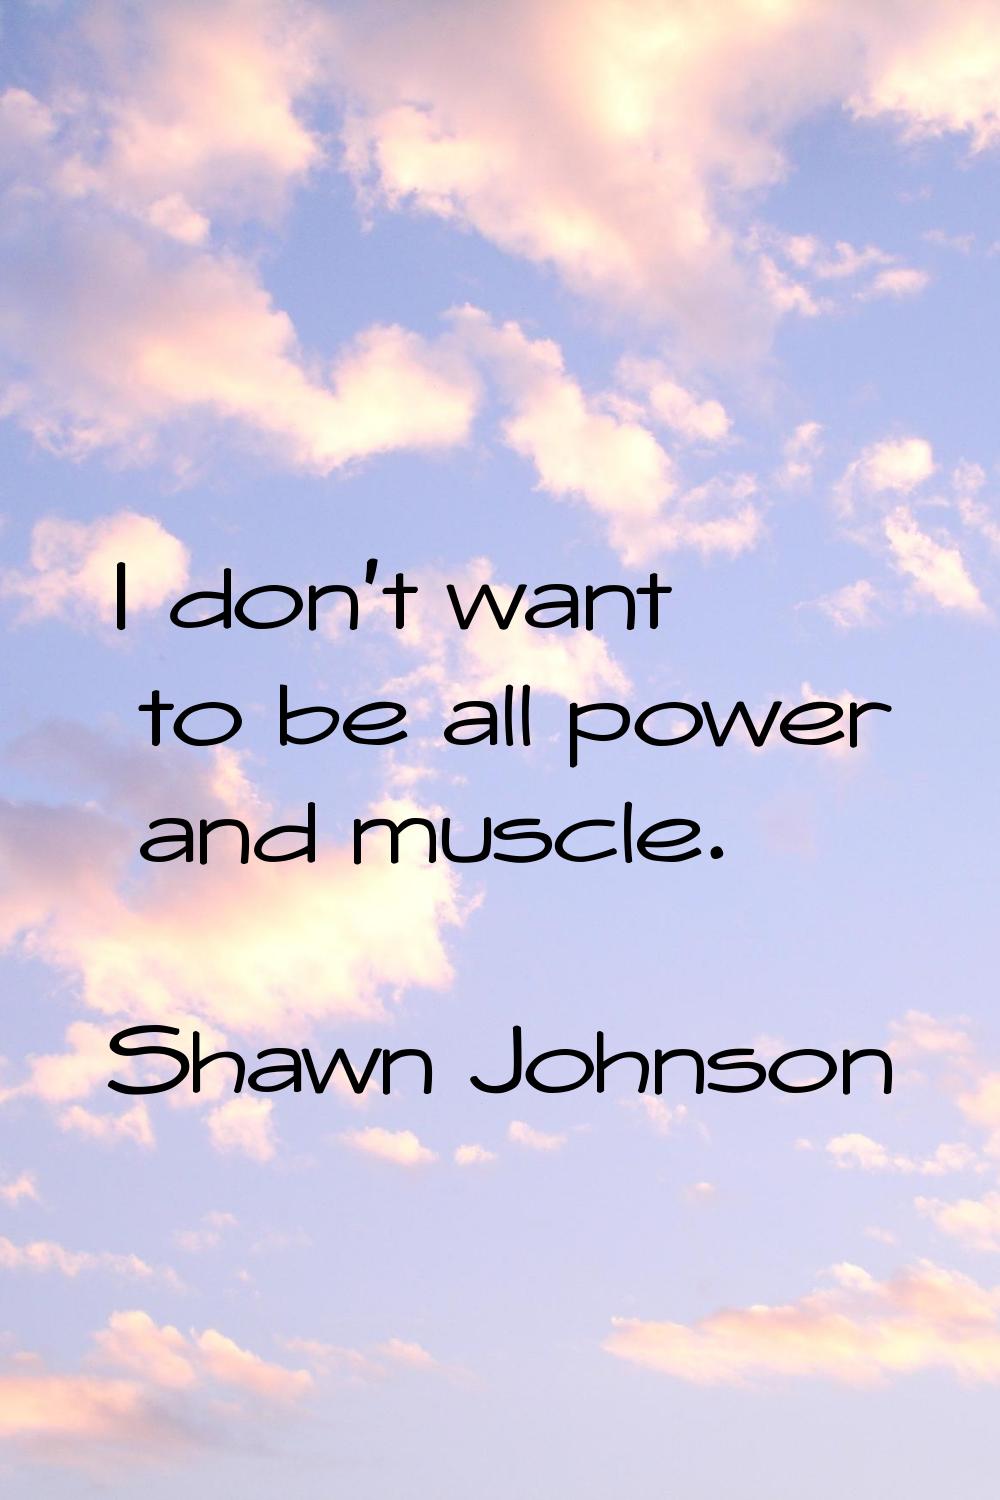 I don't want to be all power and muscle.